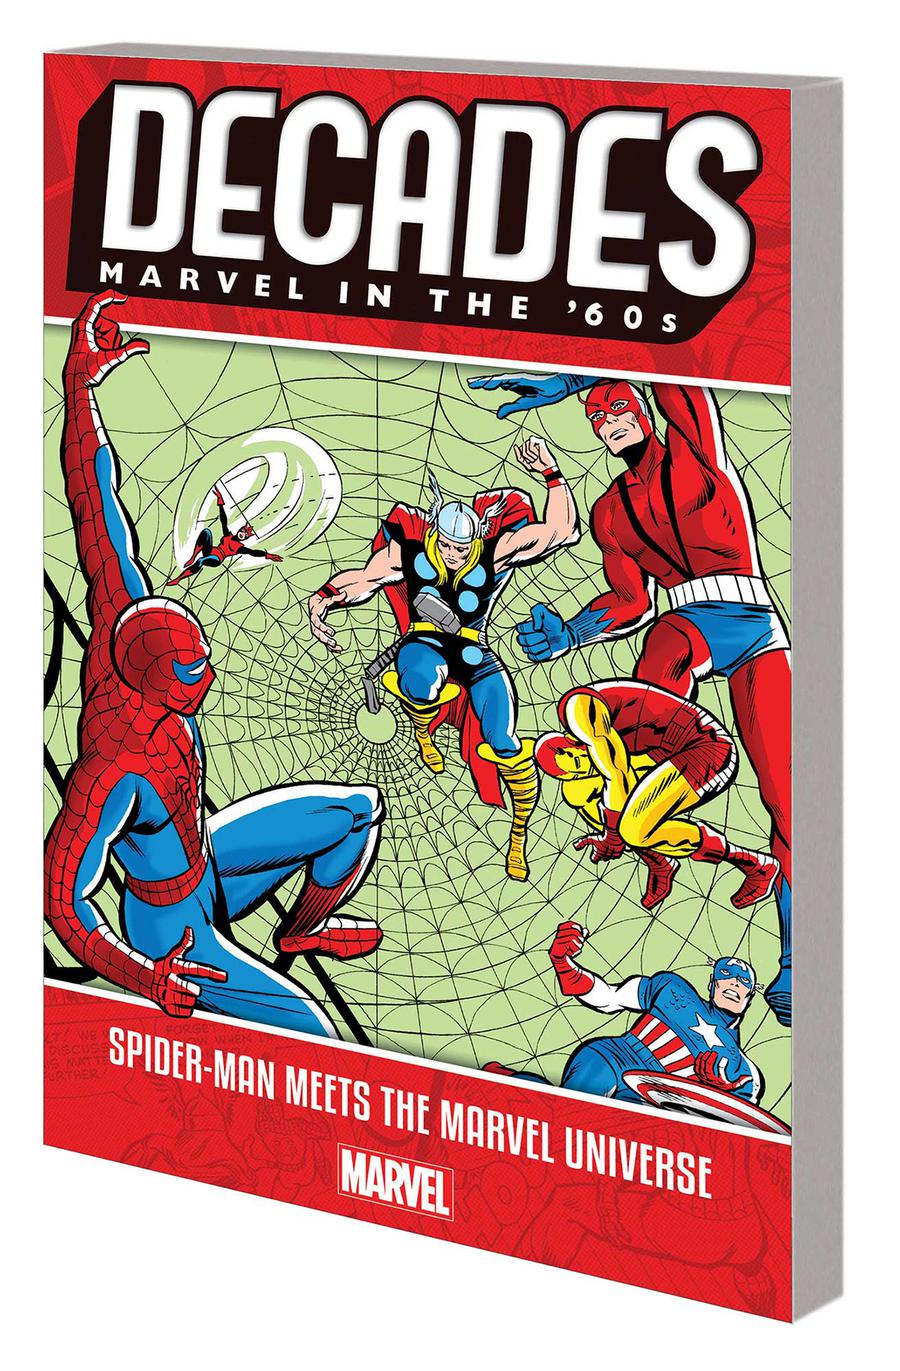 Decades Marvel In The 60s Spider-Man Meets The Marvel Universe TP